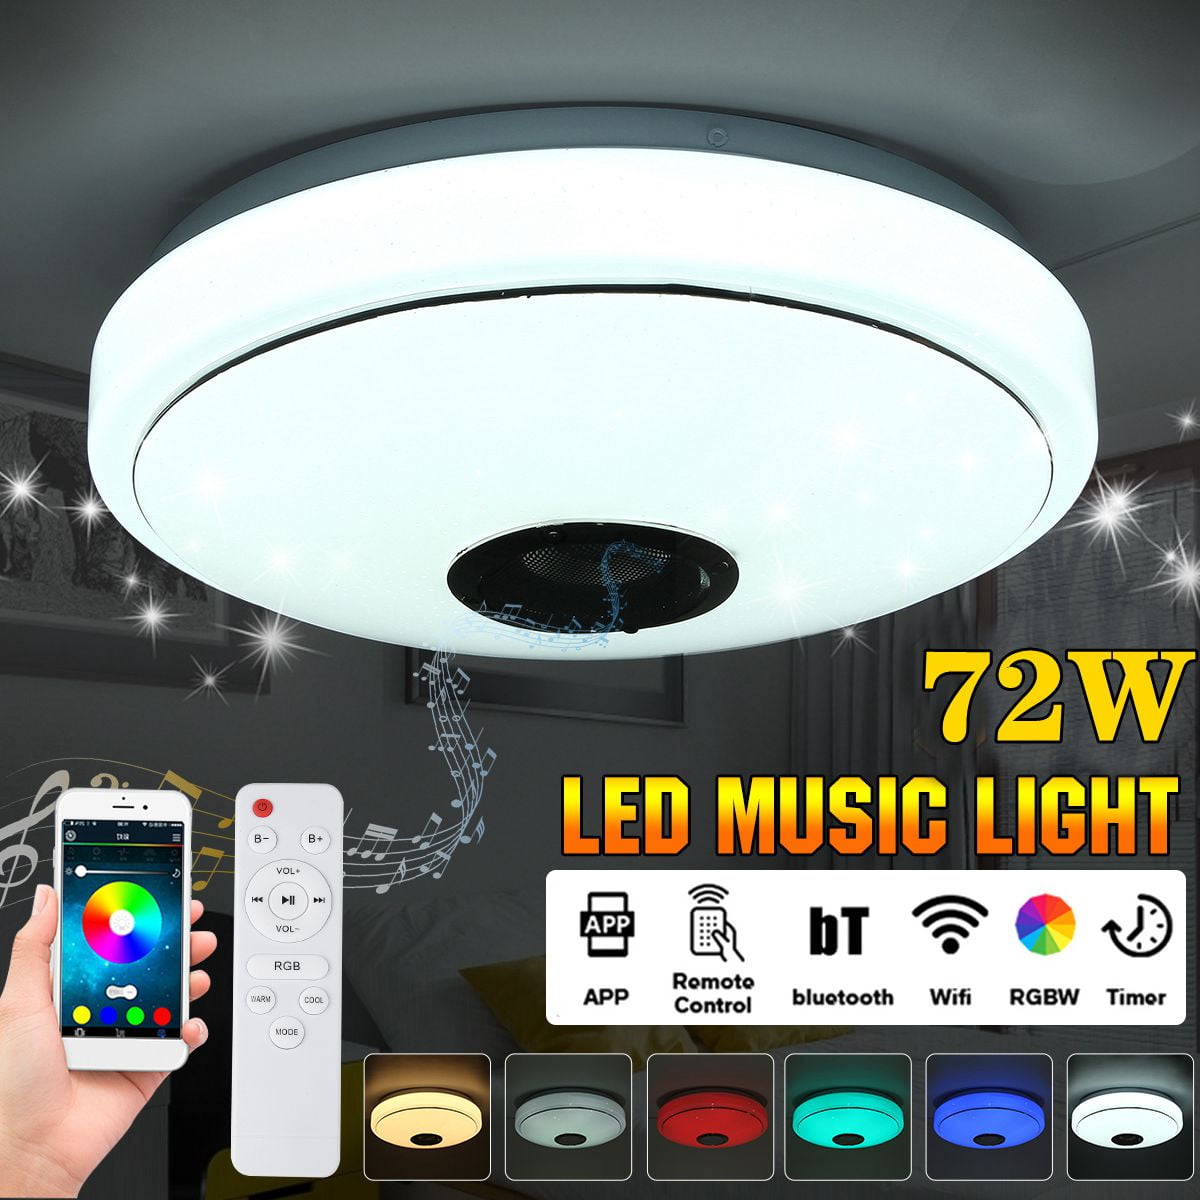 60W Smart Music LED Ceiling Light RGB Dimmable APP Remote Control Bluetooth Lamp